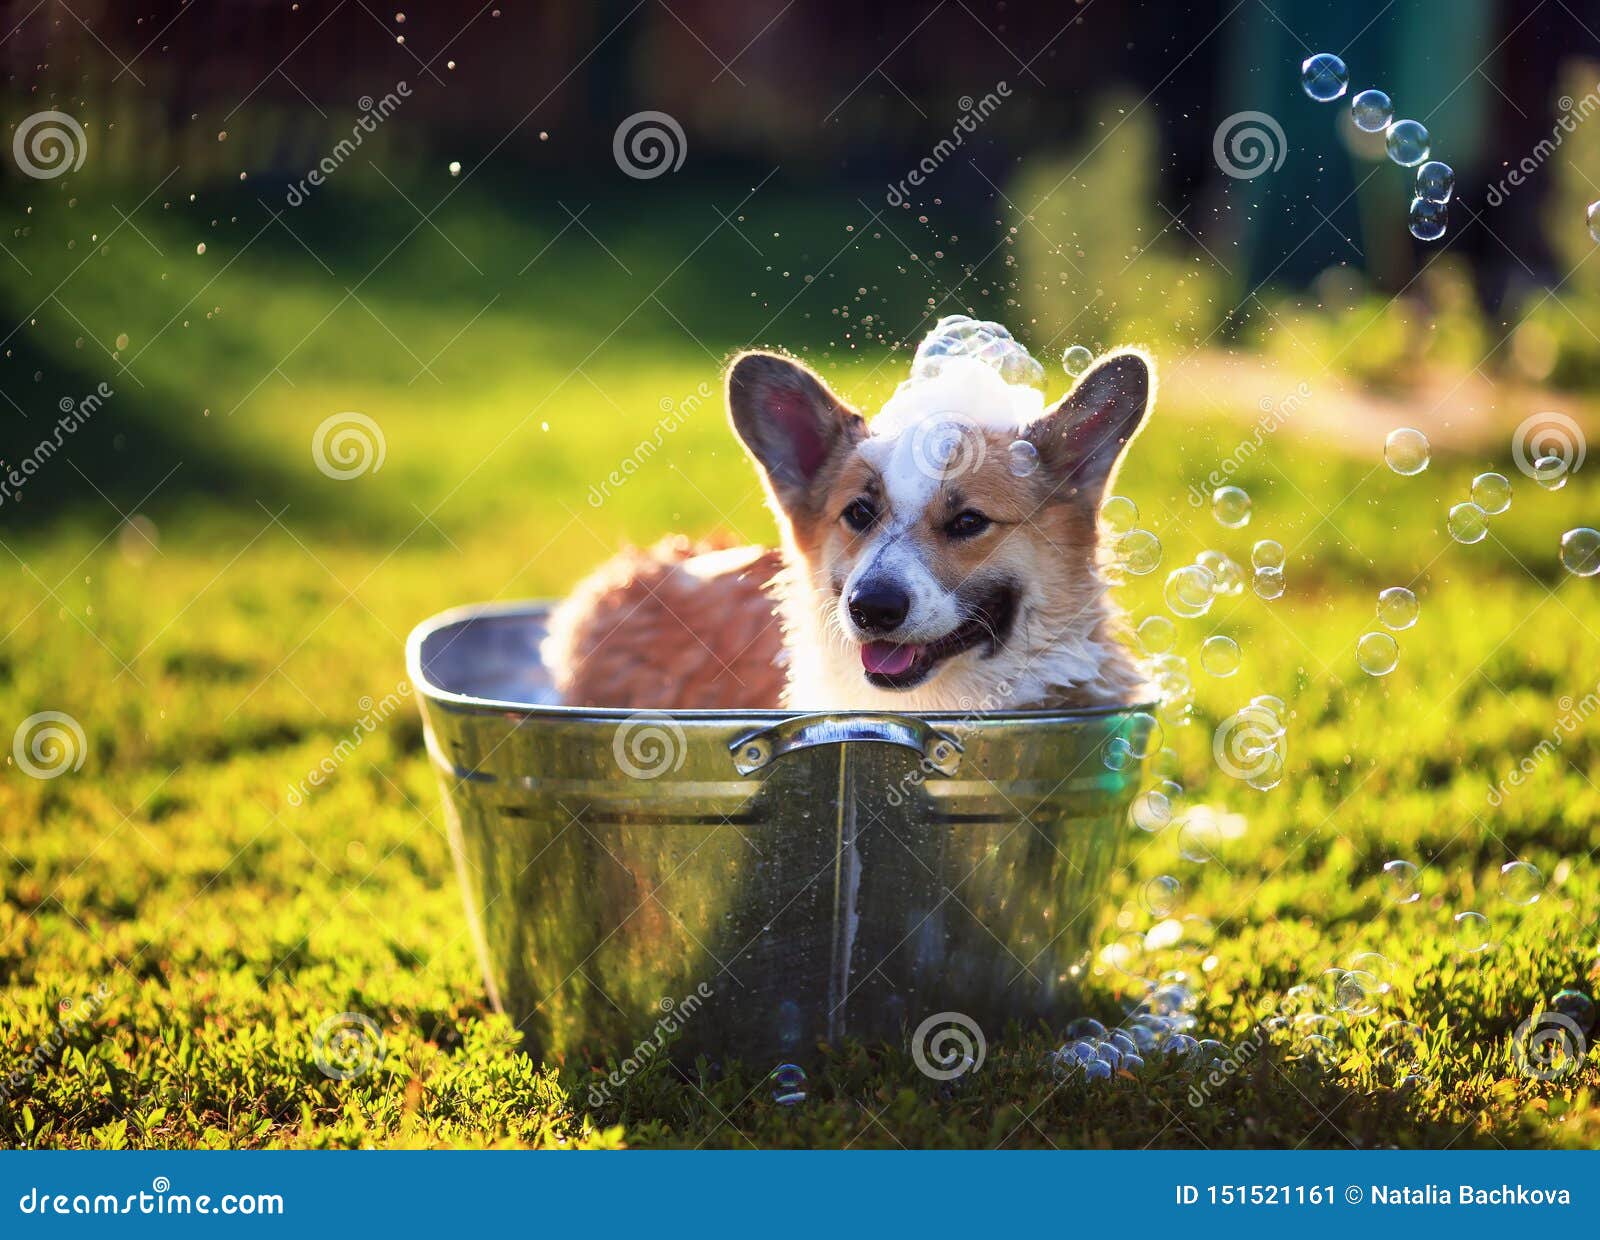 Cute Funny Puppy Dog Standing in a Metal Basin, is Cooled, Washed on ...